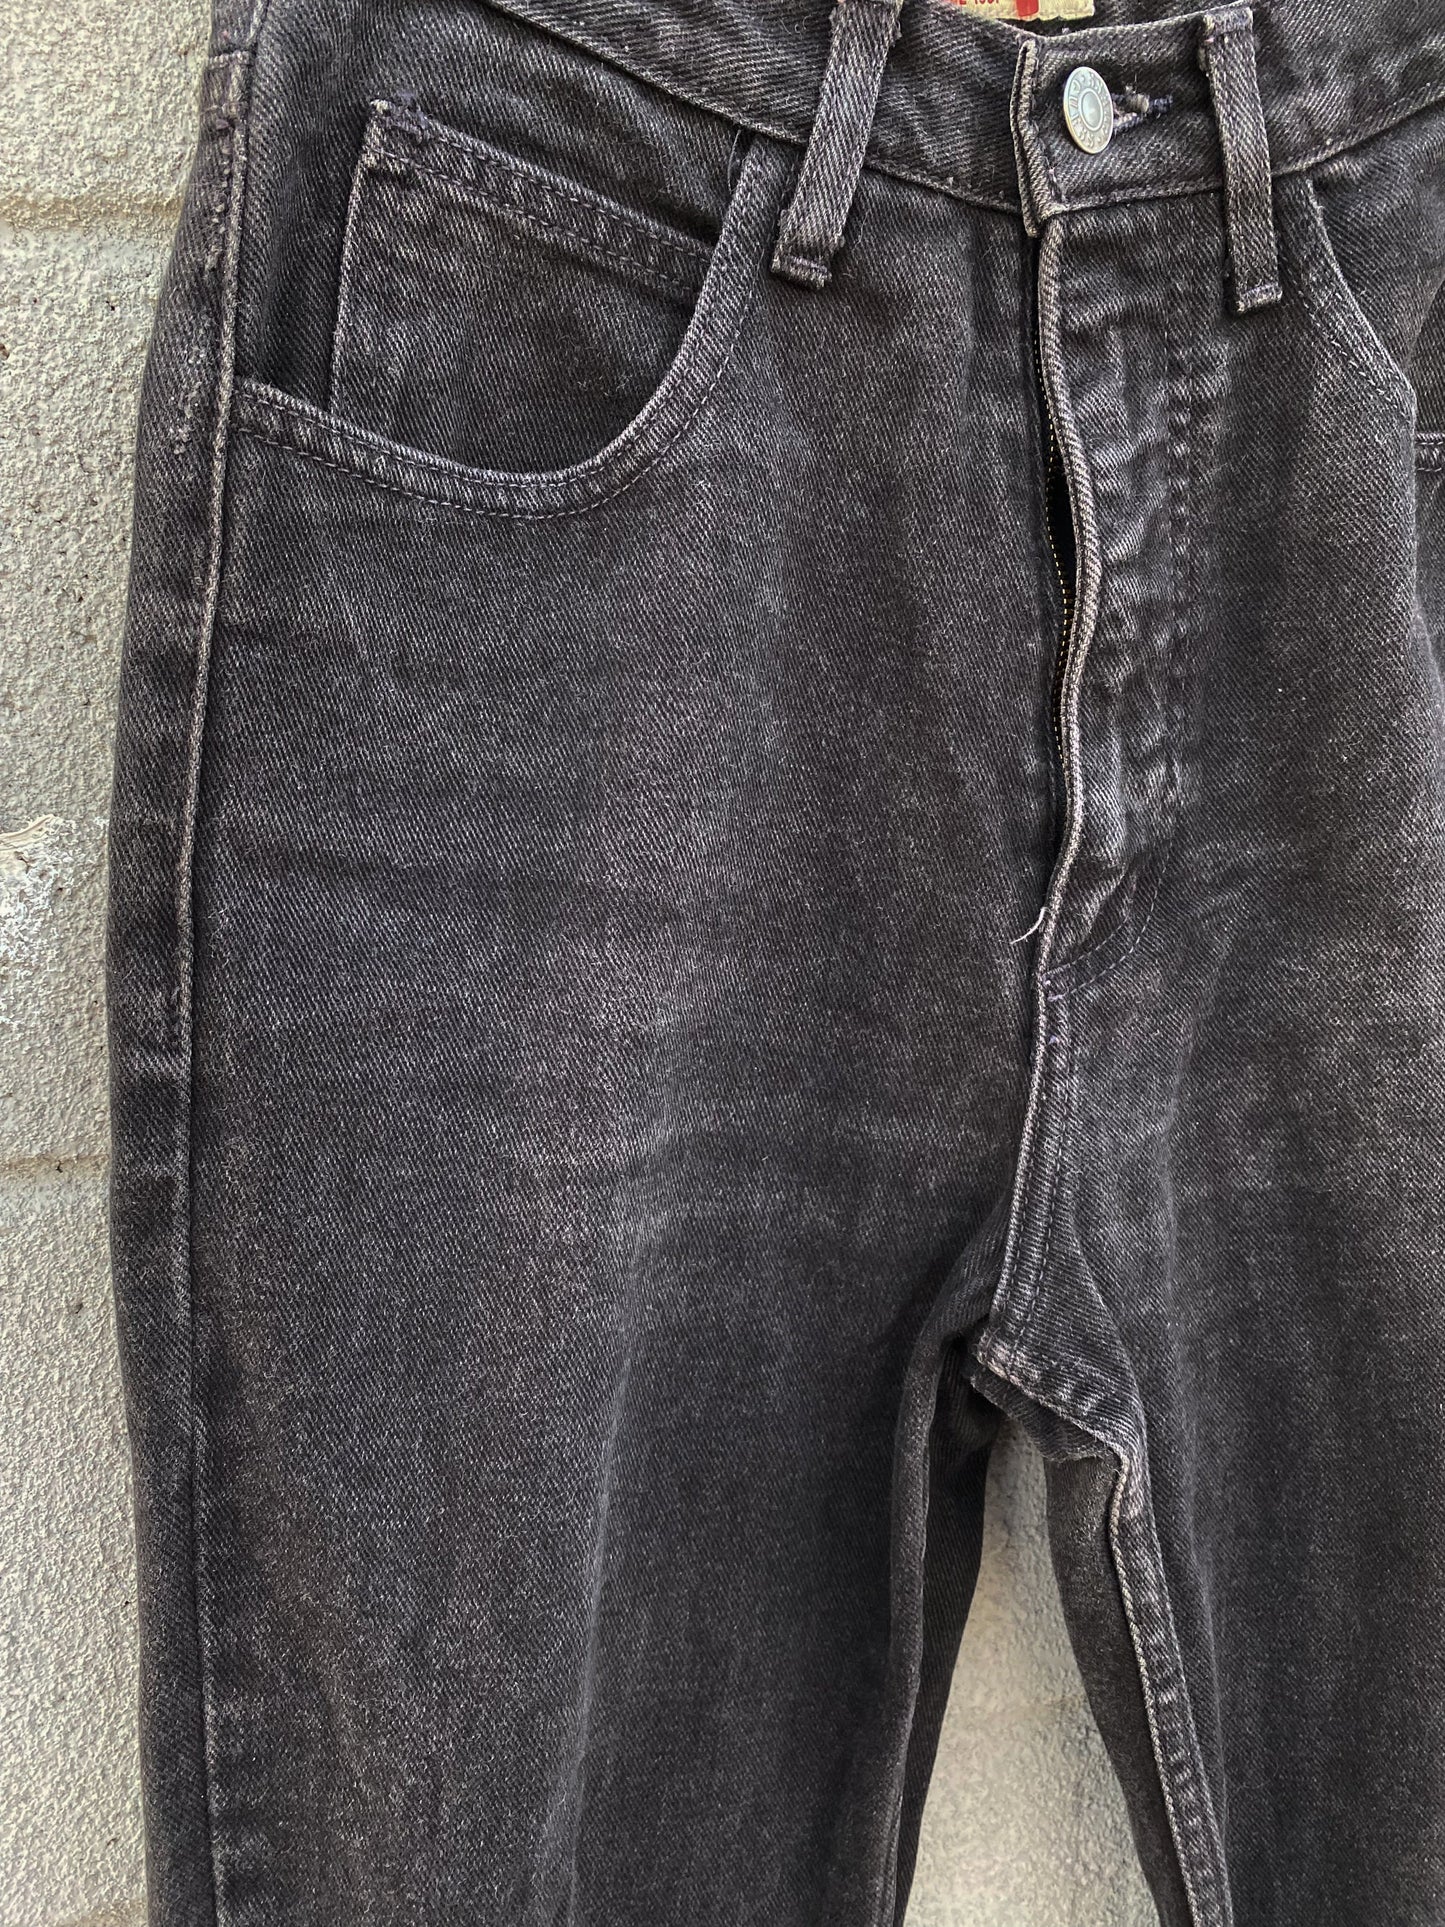 90's Guess High Rise Faded Black Jeans | 26 x 28